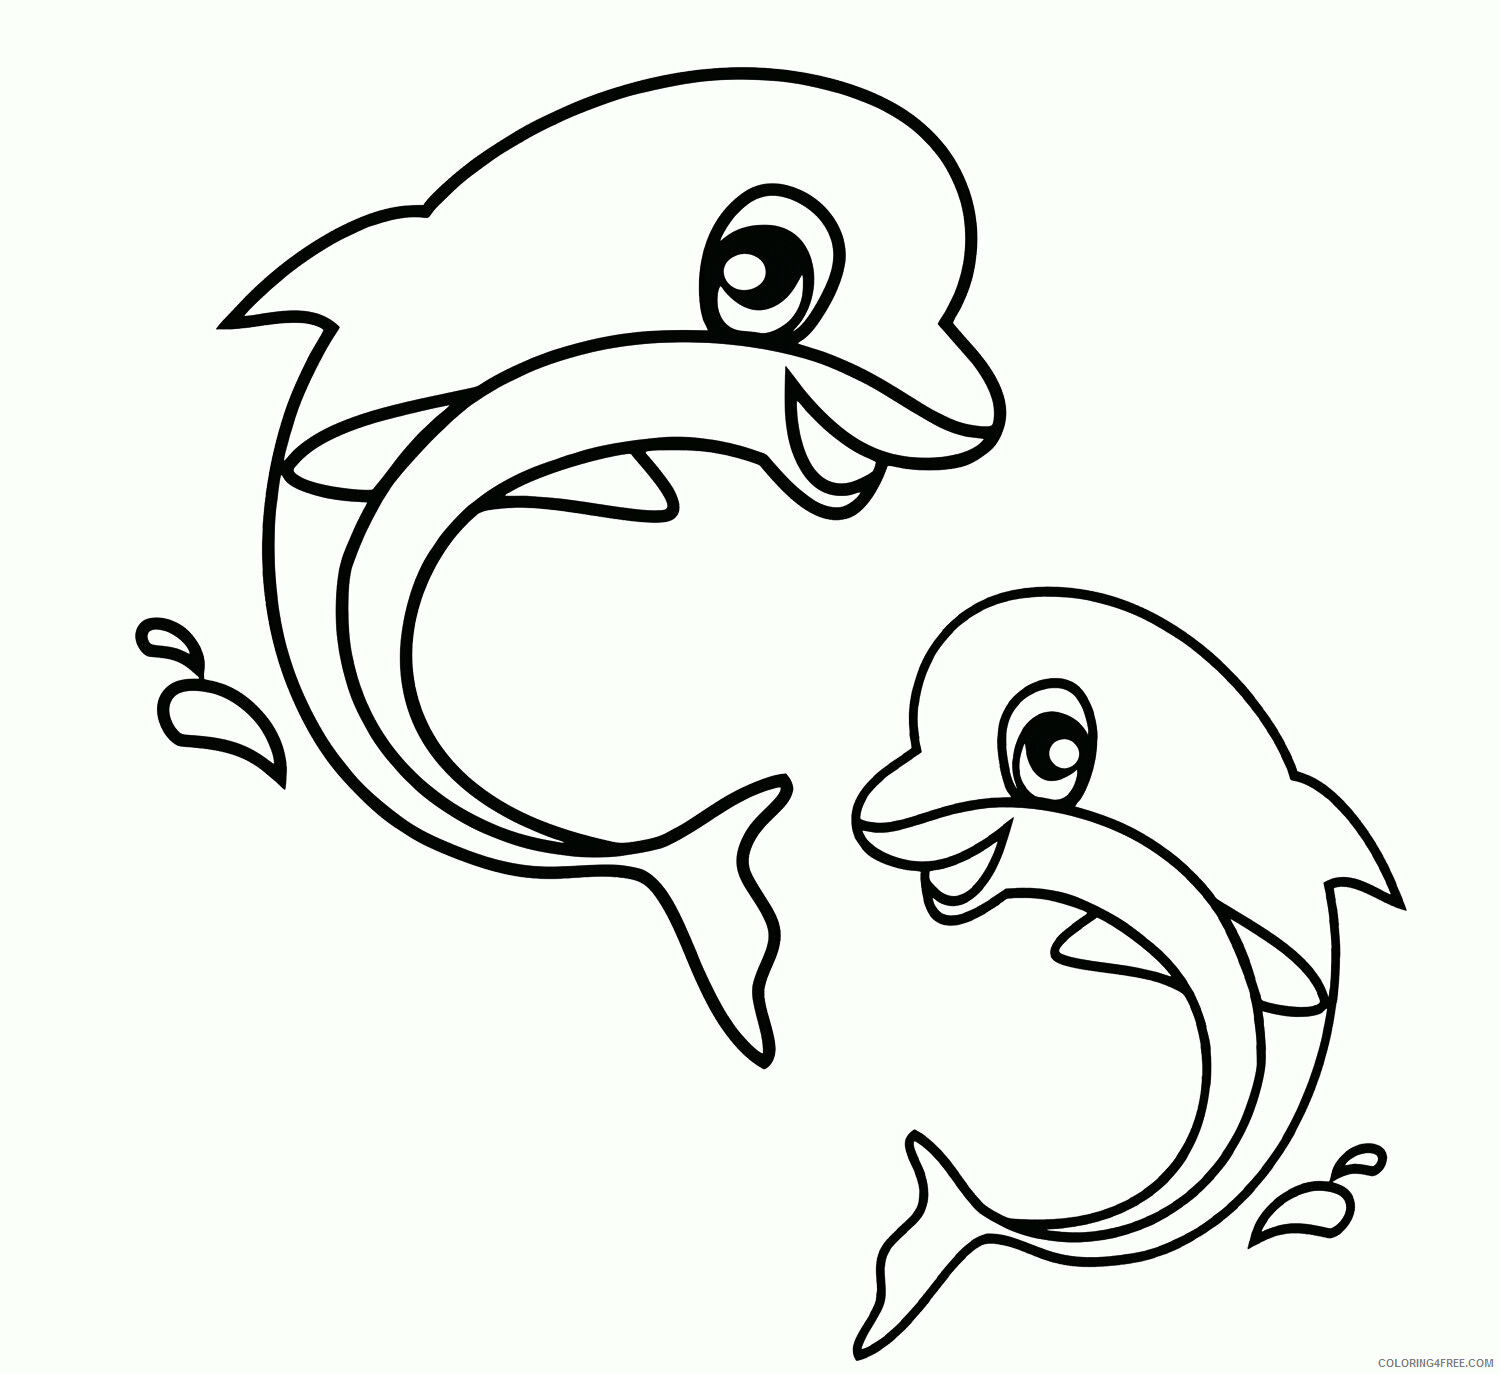 Animal Coloring Pages for Children Printable Sheets Related Ocean item 2021 a 0250 Coloring4free